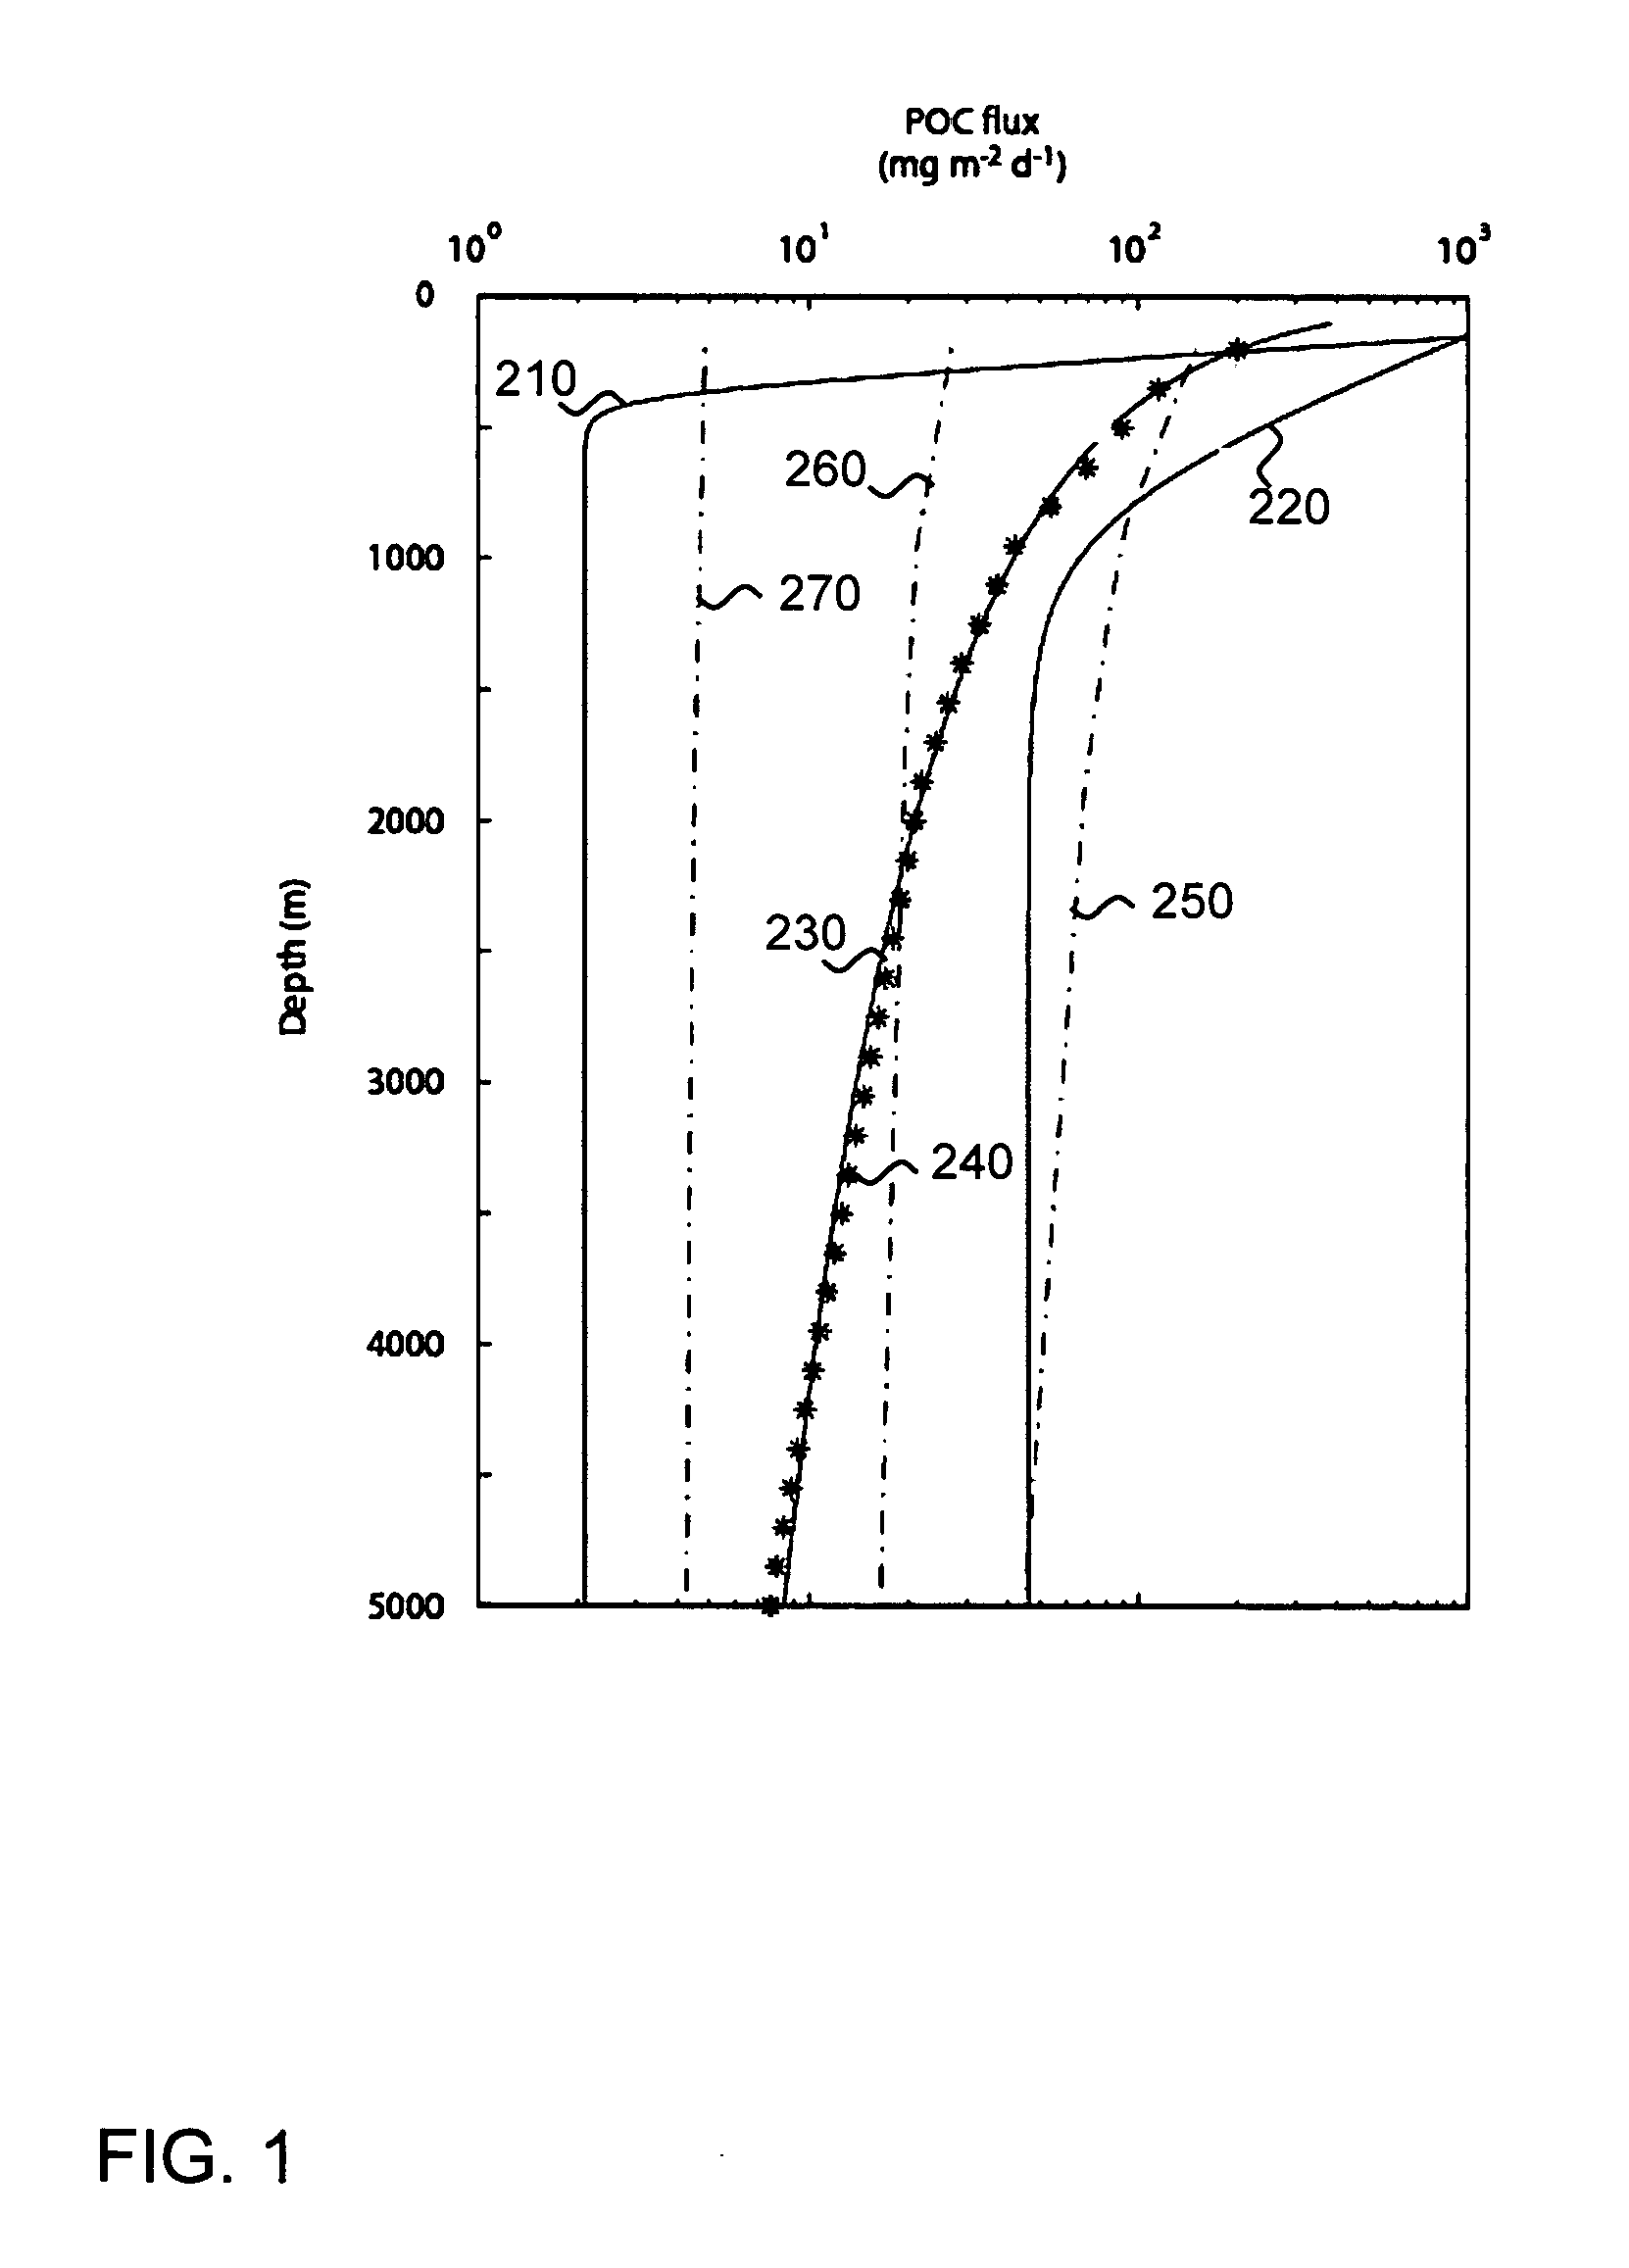 Method of sequestering carbon dioxide in aqueous environments